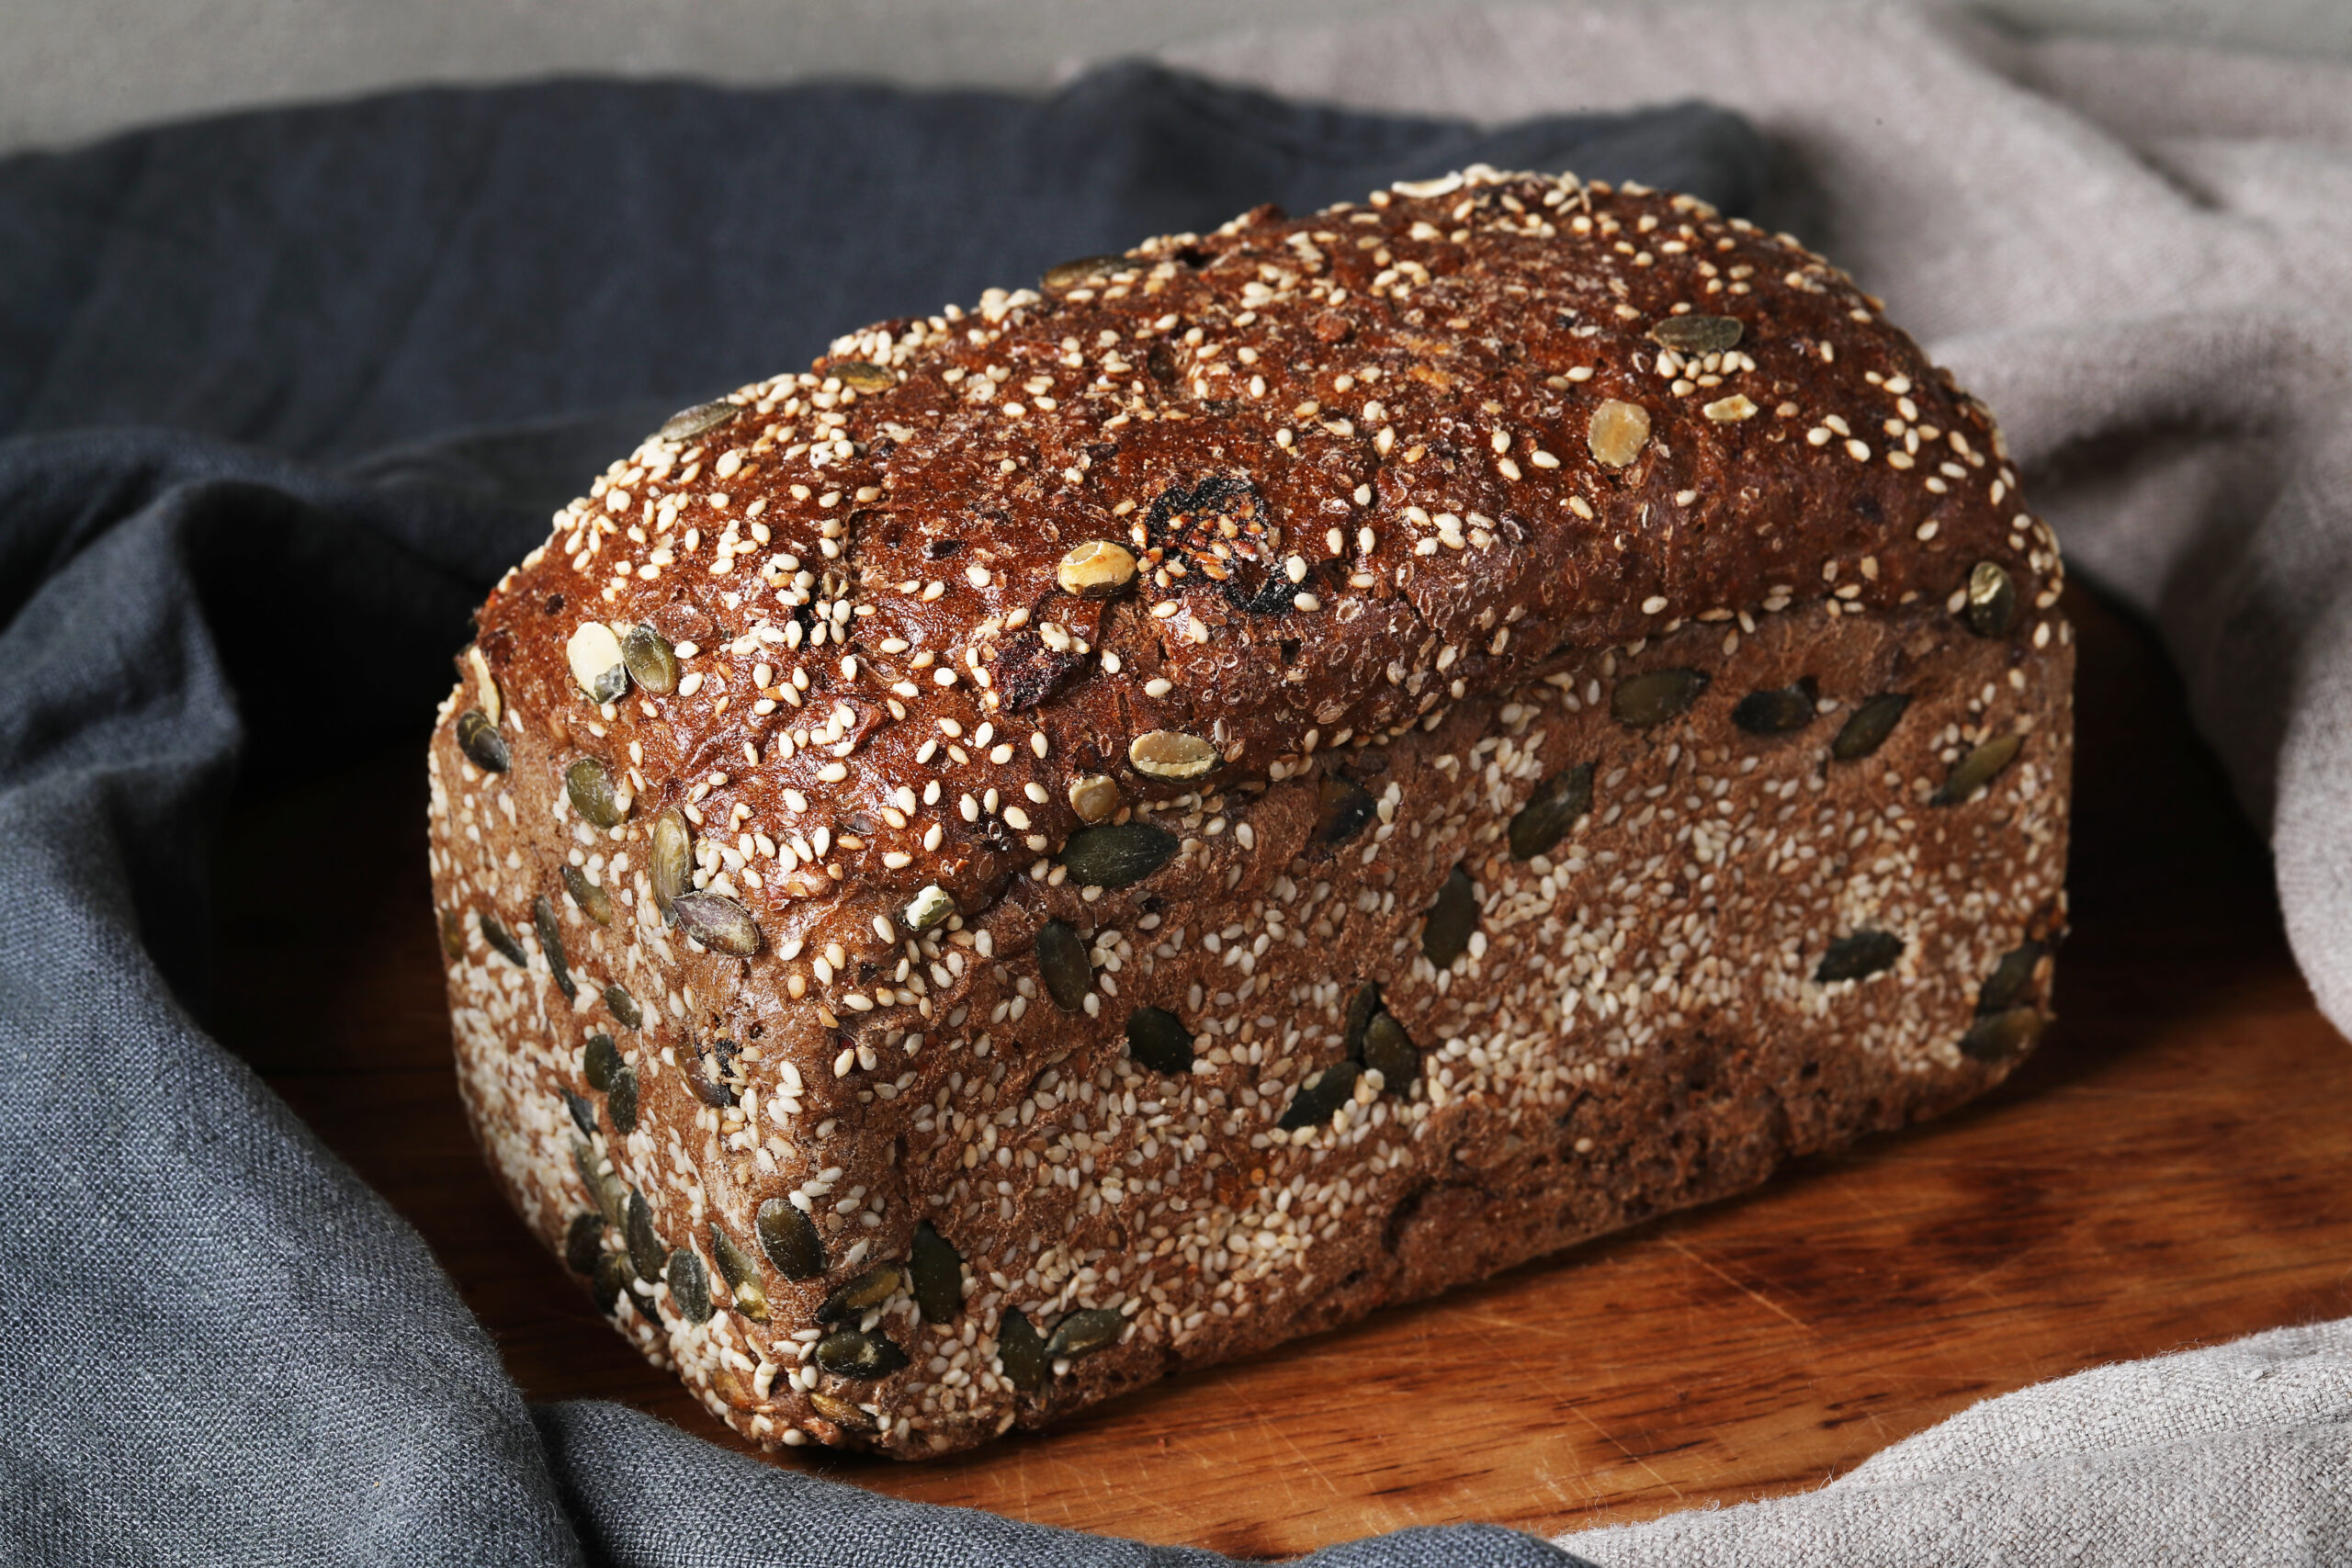 Wholesome Goodness: Homemade Multigrain Brown Bread for a Healthy Lifestyle!